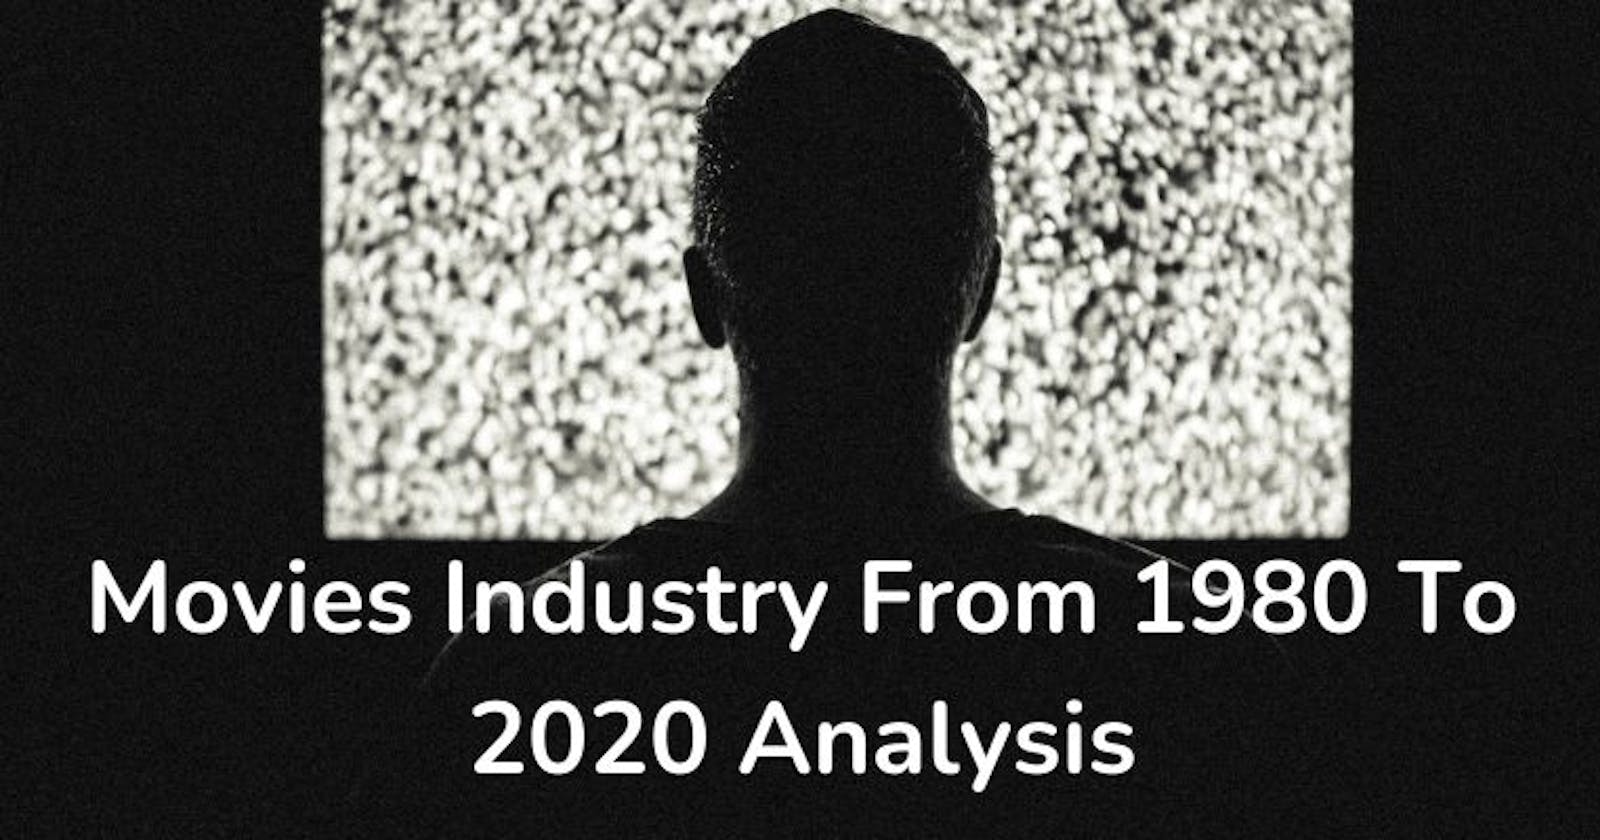 The Movie Industry from 1980 to 2020